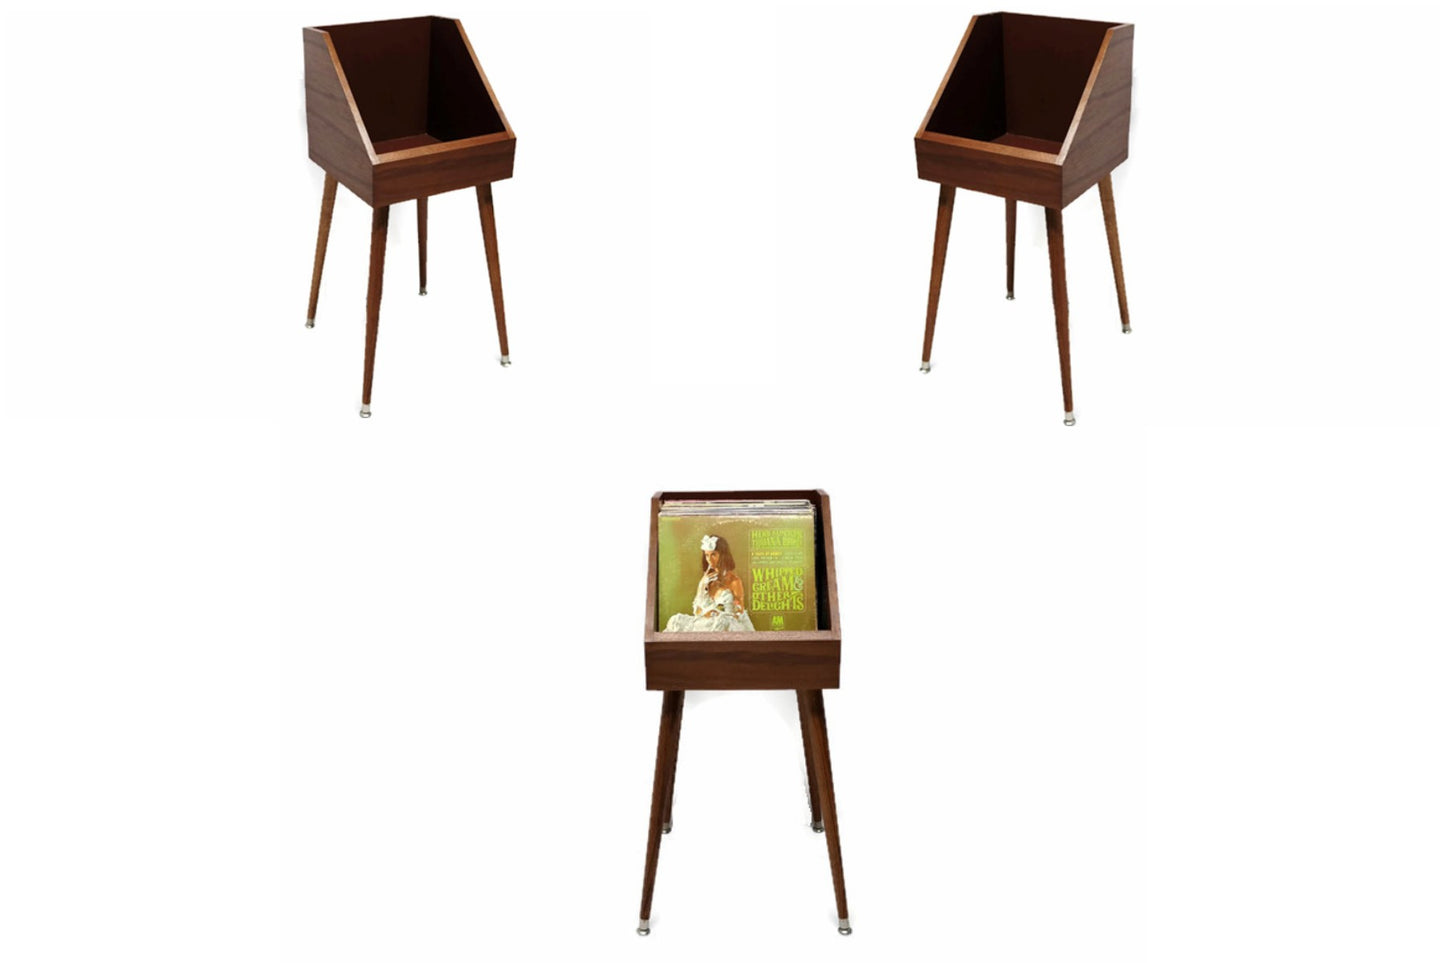 **SOLD OUT** The Vintedge Co™ Mid Century Retro Single Display LP Record Stand The Vintedge Co.